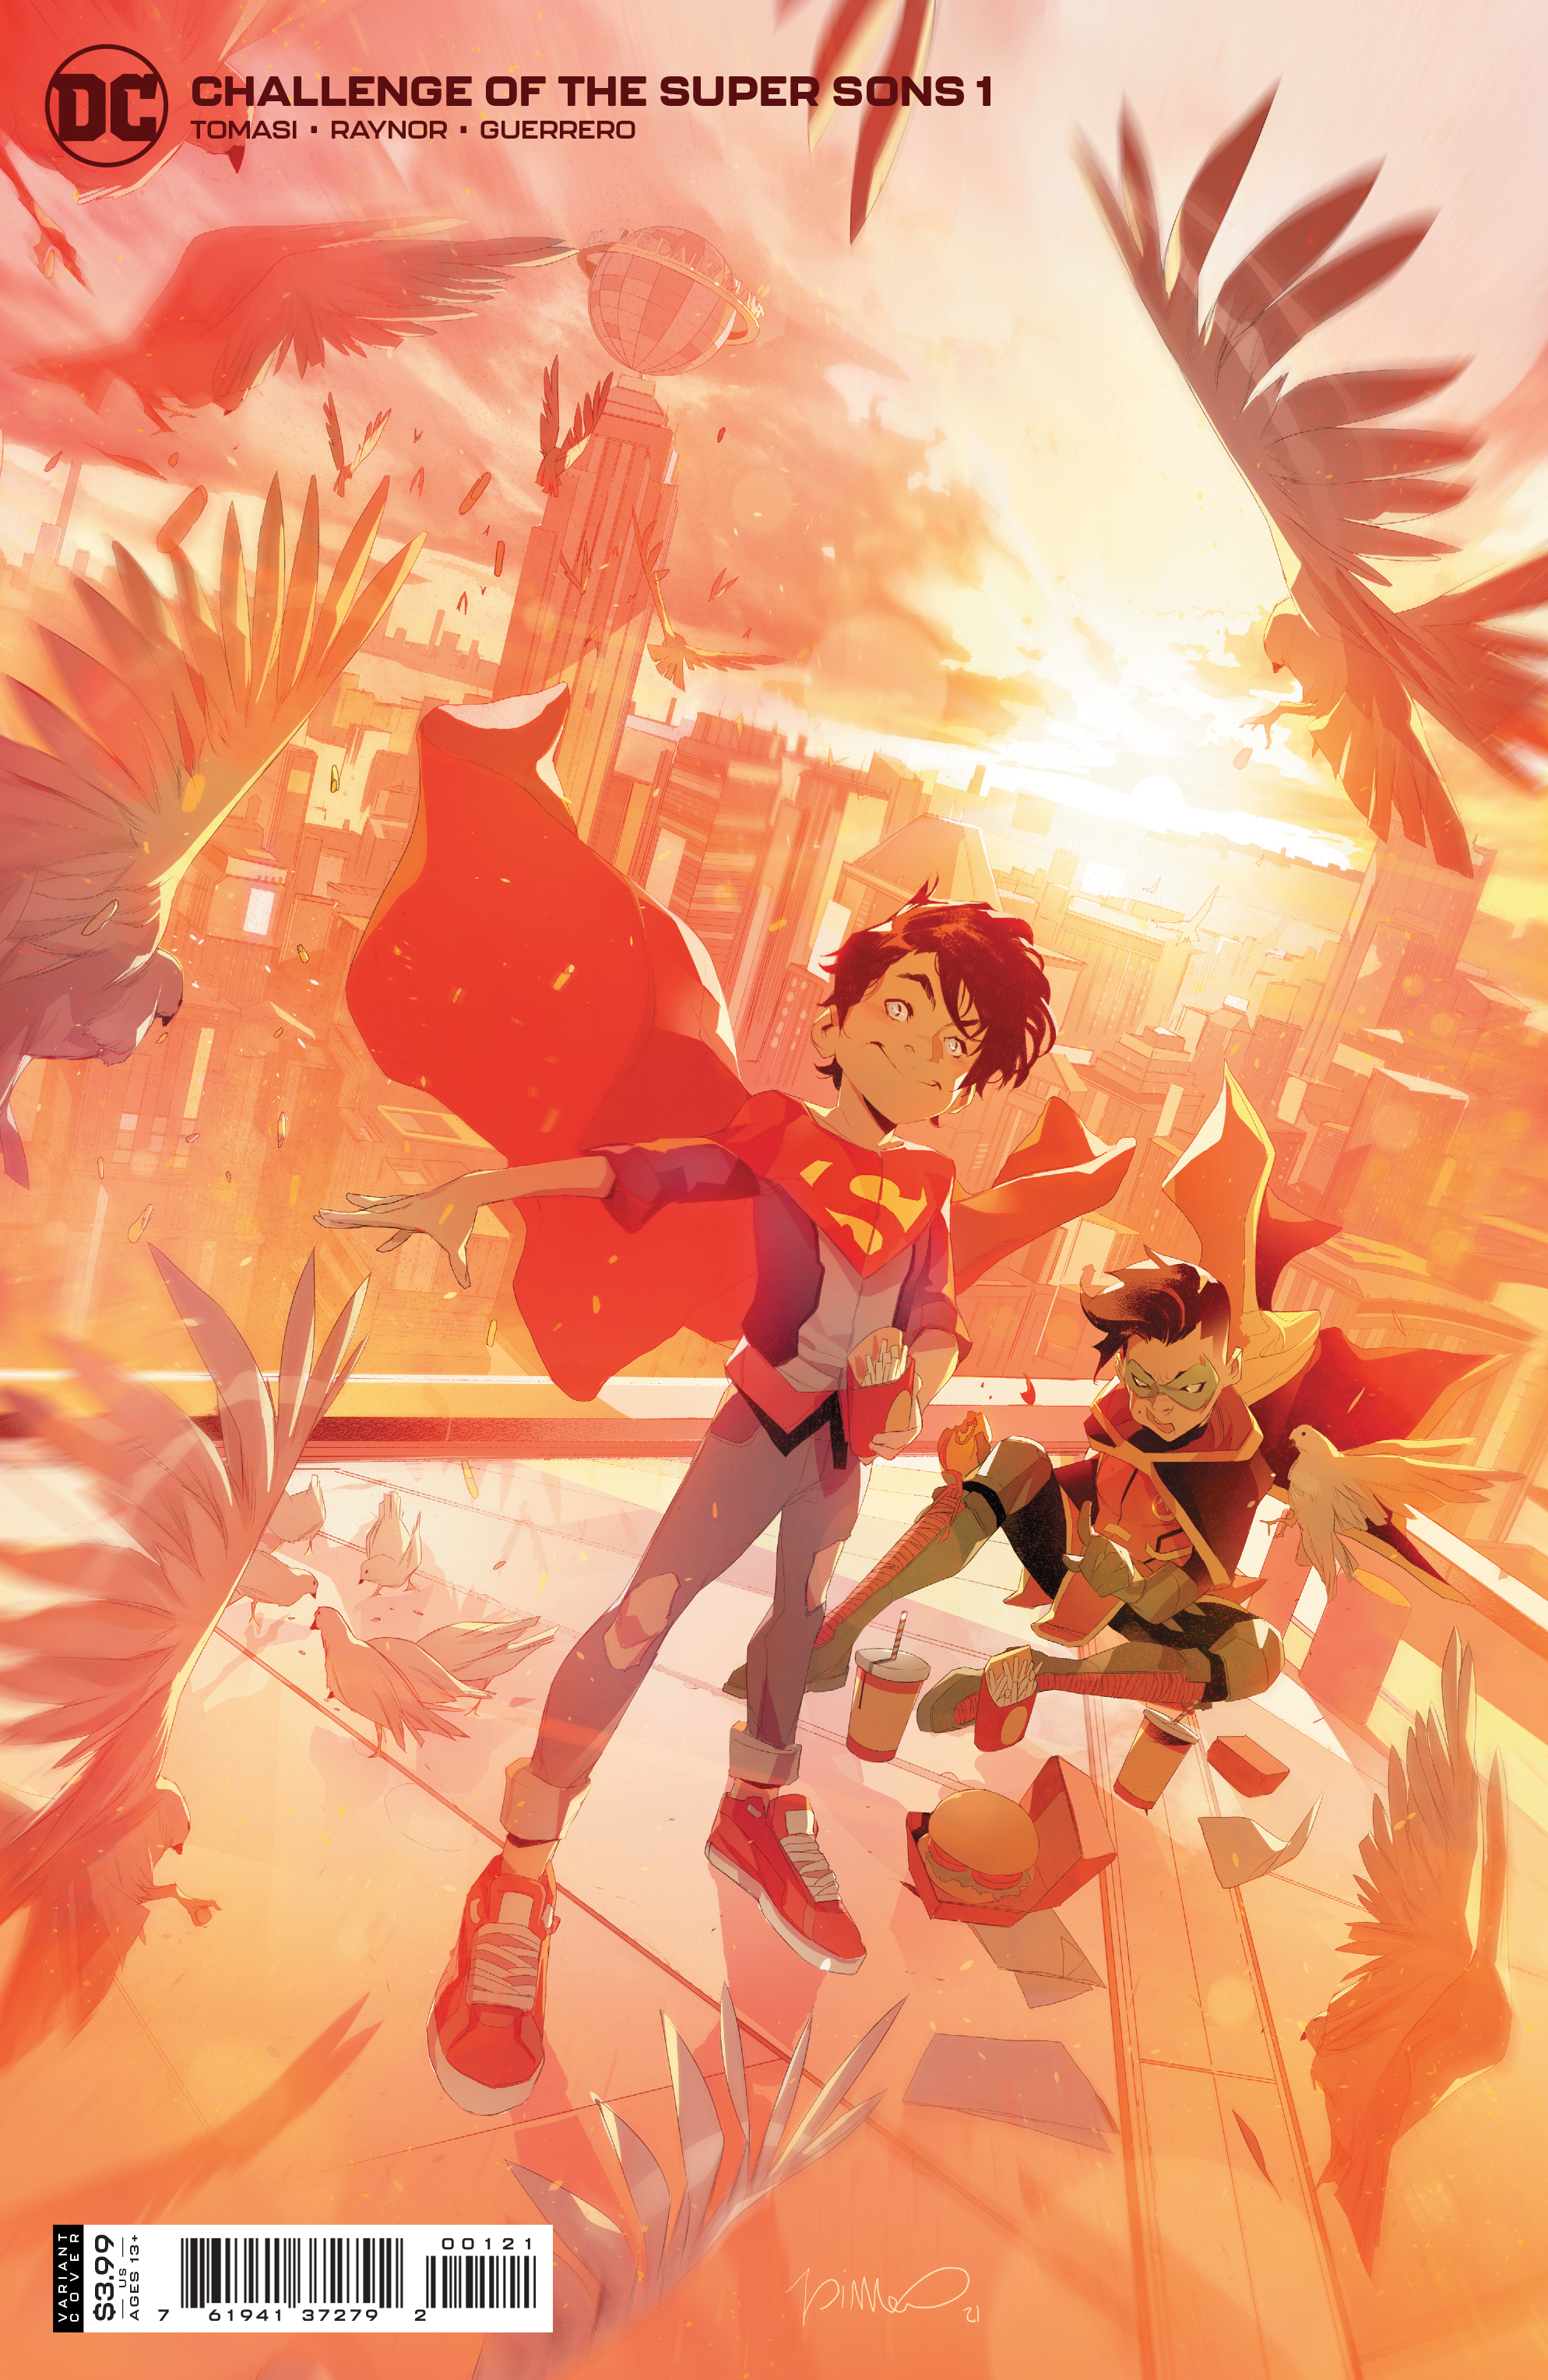 CHALLENGE OF THE SUPER SONS #1 (OF 7) CVR B SIMONE DI MEO VARIANT